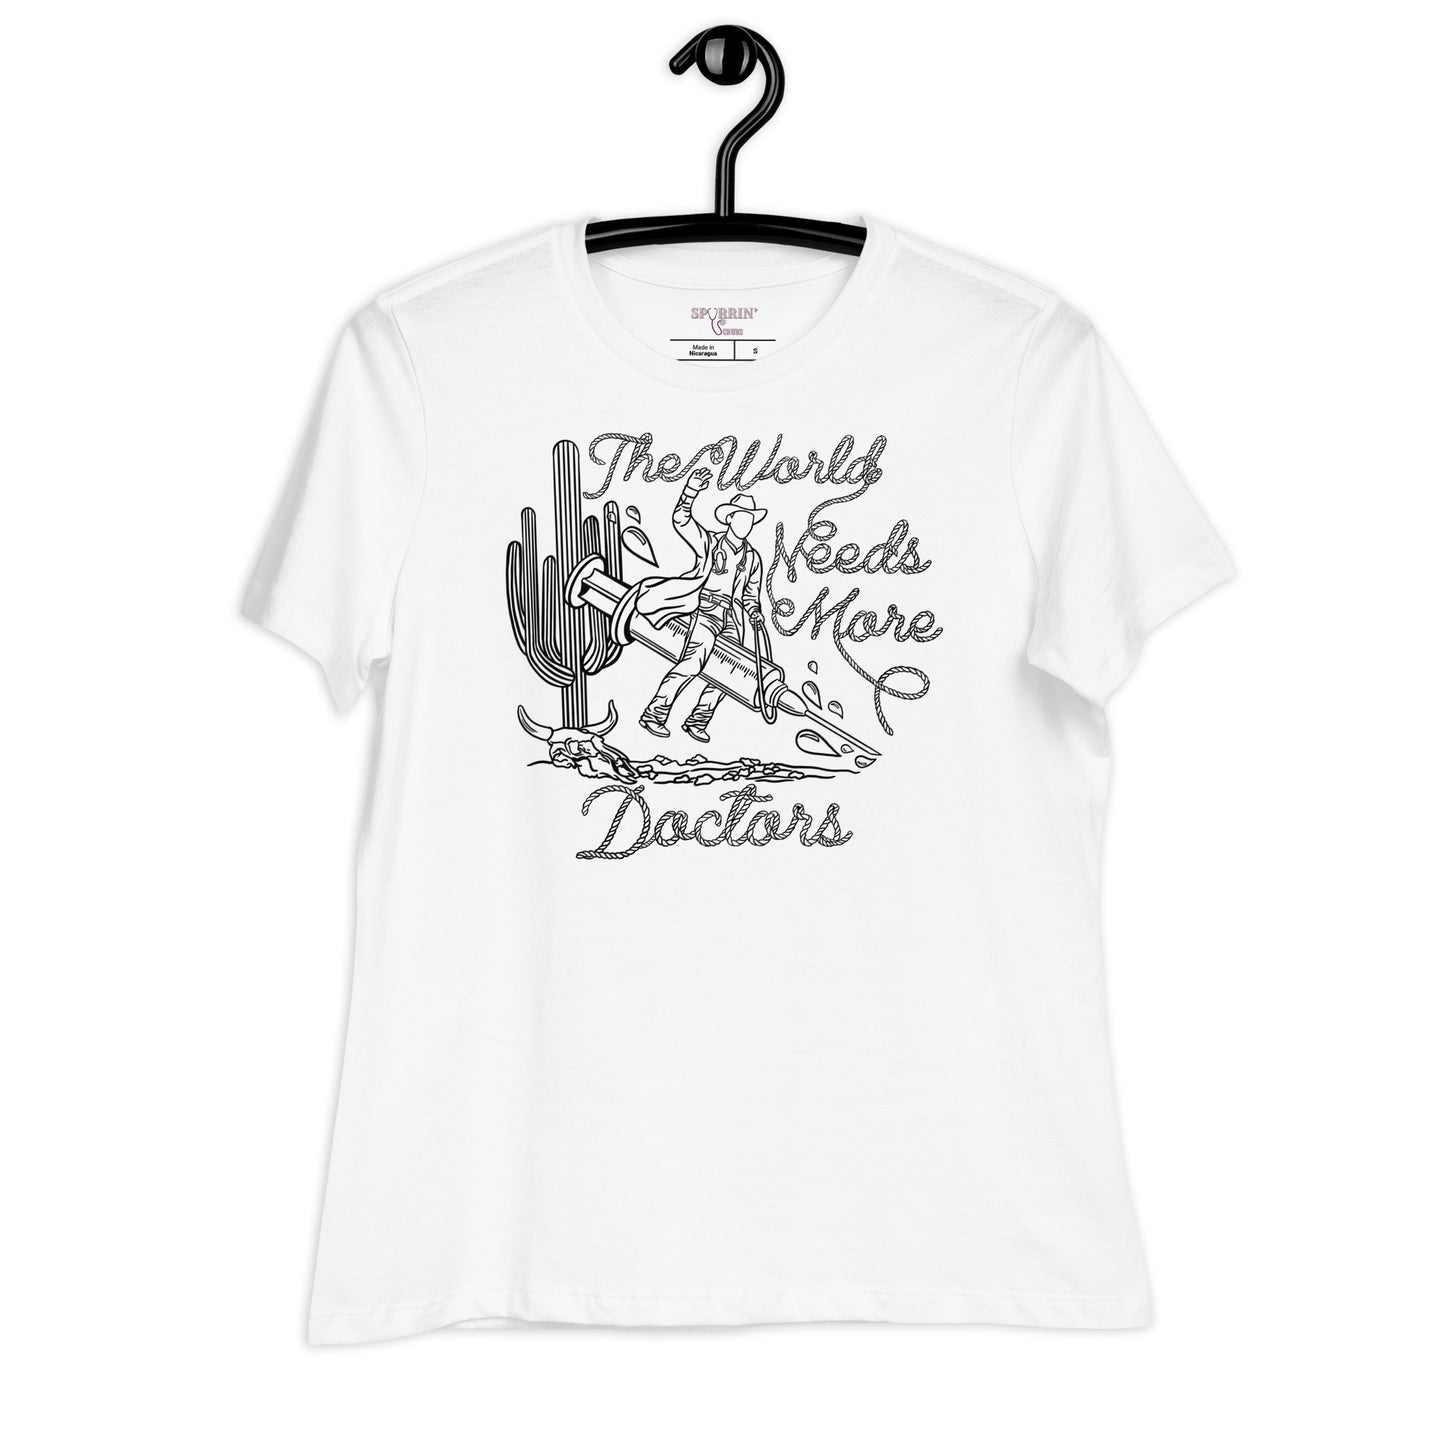 TWNM- Doctors Women's Relaxed T-Shirt Light Colors